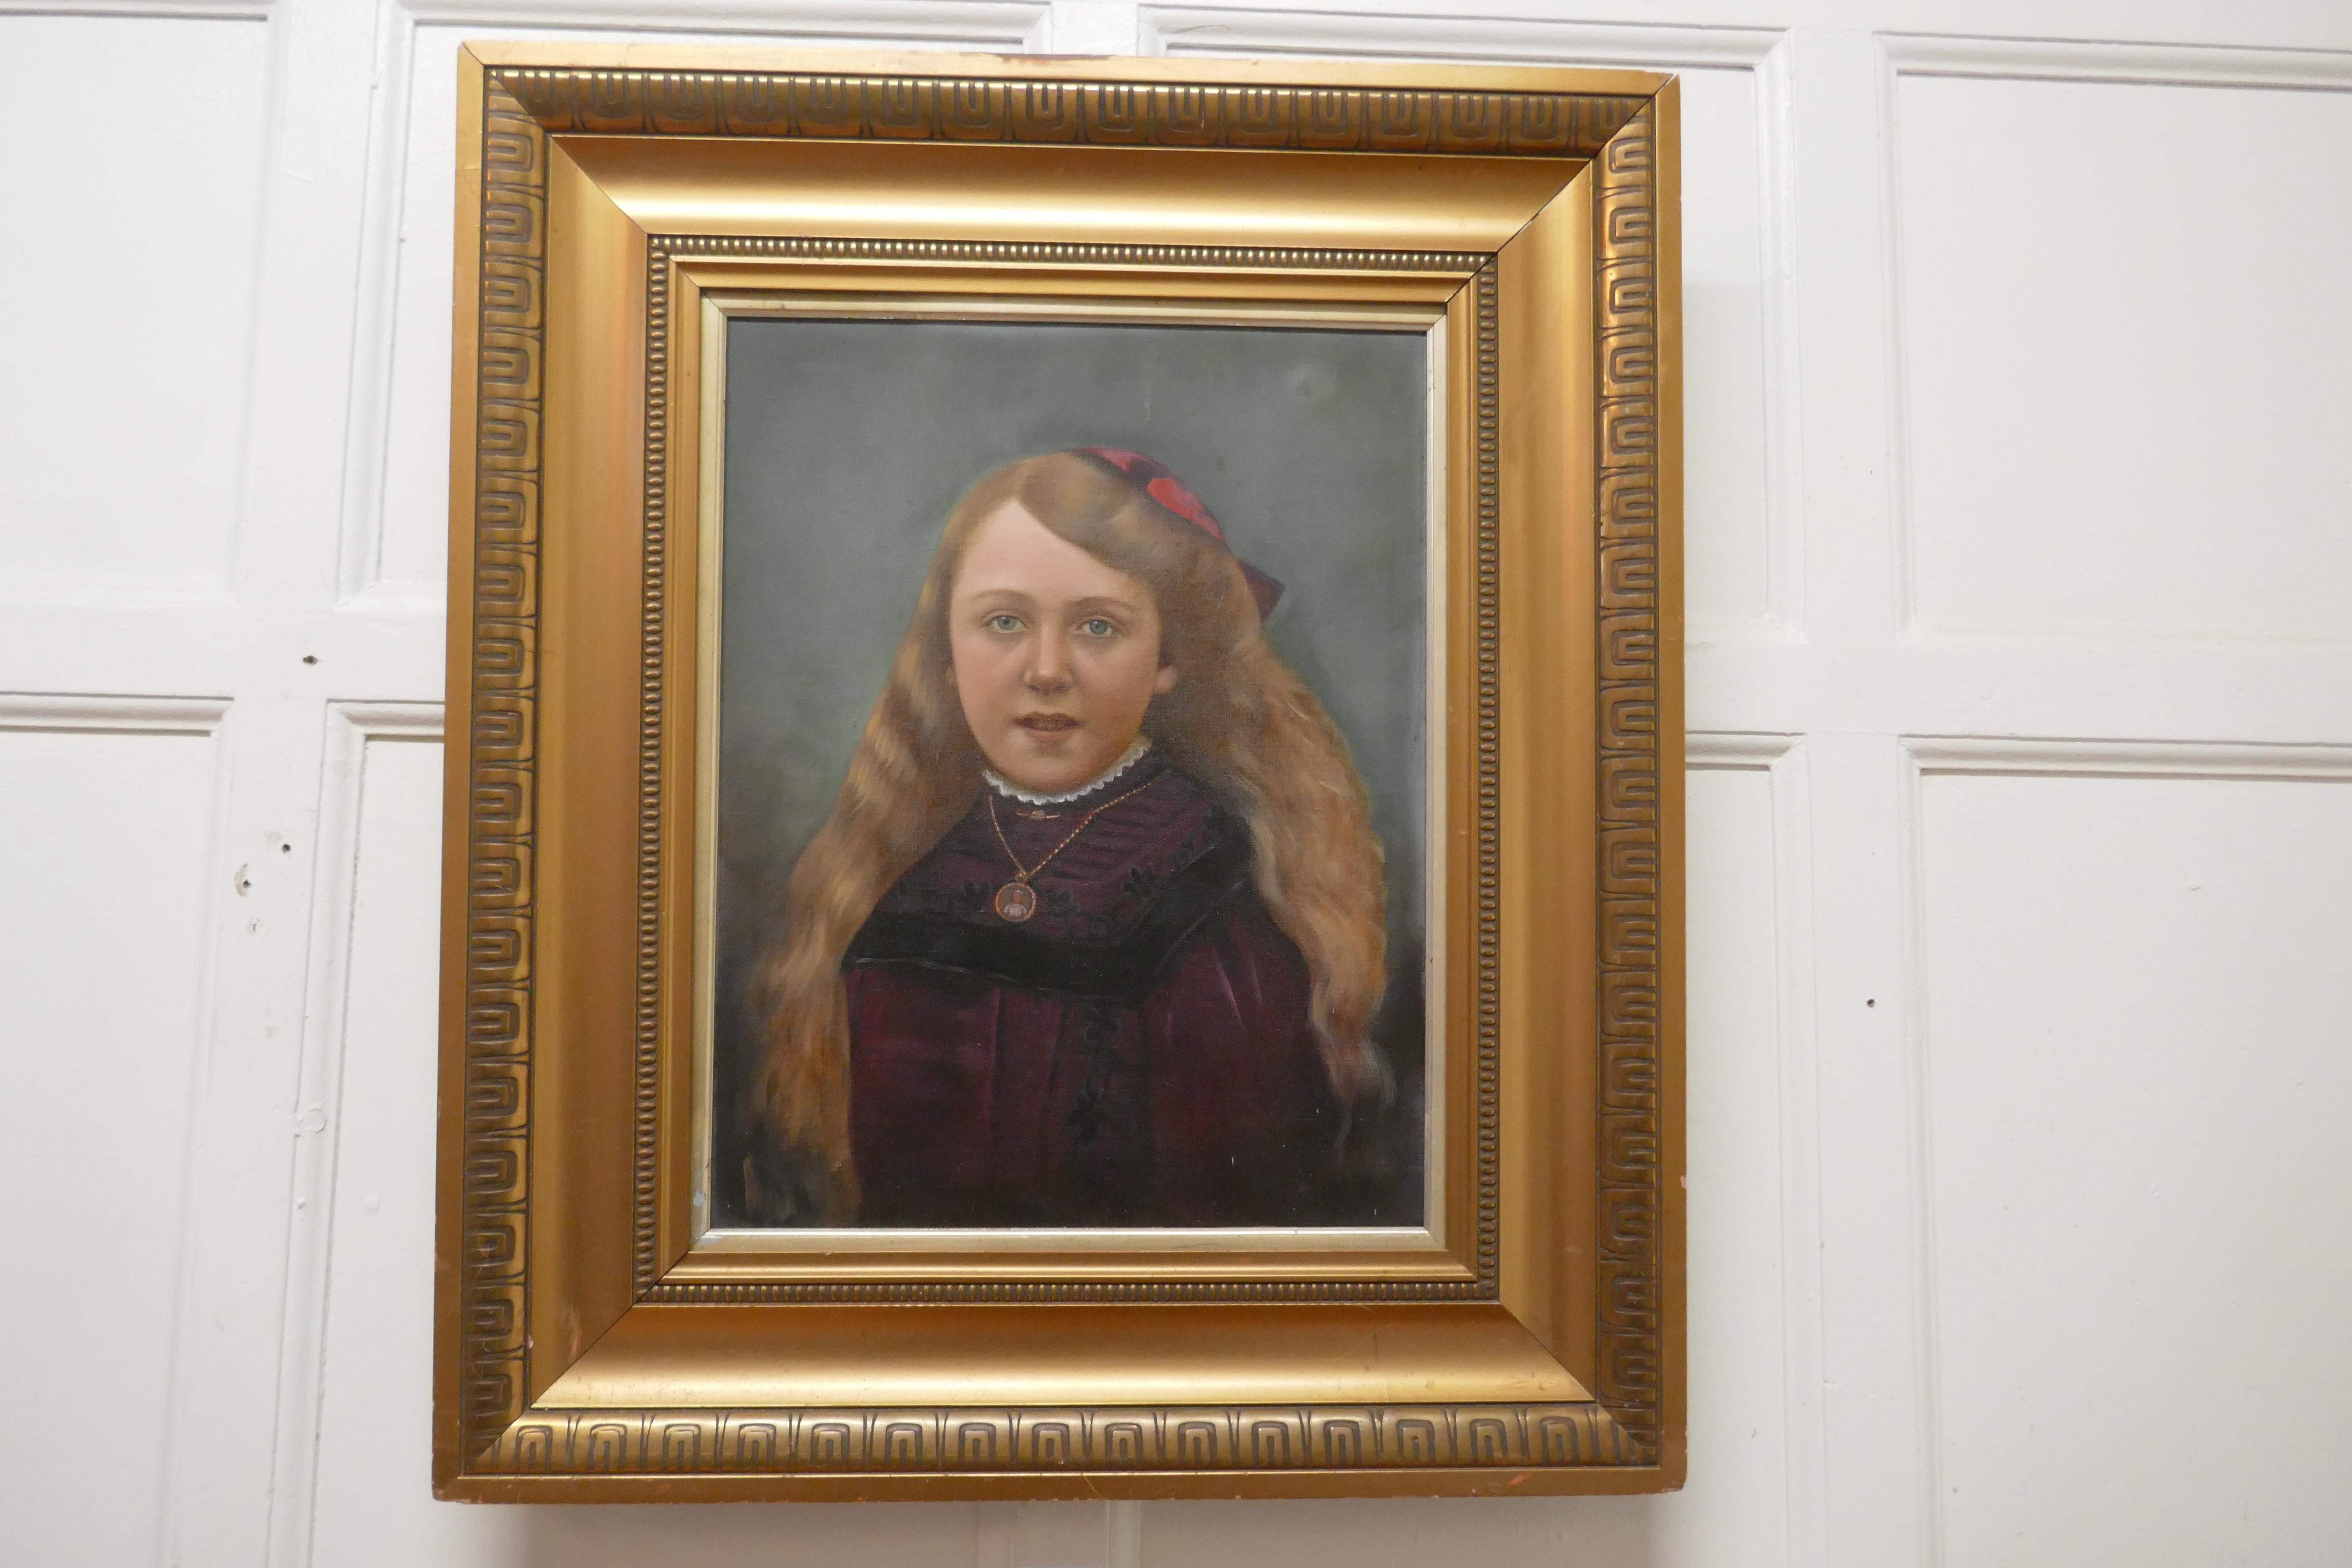 19th century oil on canvas portrait of a young girl

A Delightful portrayal of a young girl she is seated wearing Purple and Lace with a Gold Locket, going by the costume we can take the date to be around 1870
The painting is well executed and it